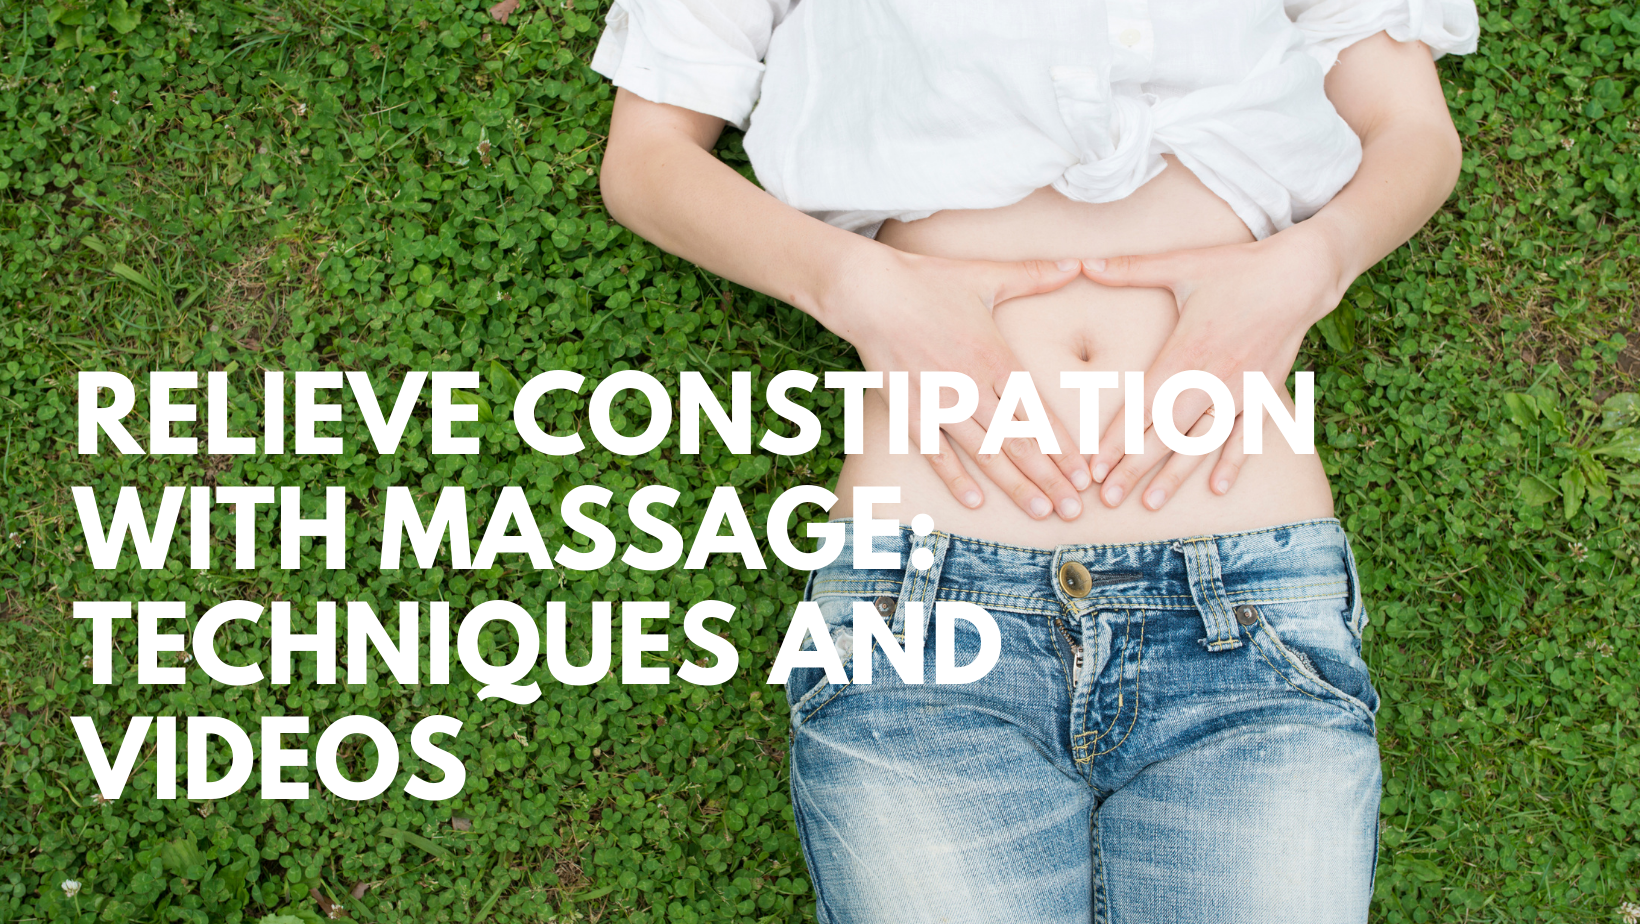 Relieve Constipation with Massage Techniques and Videos